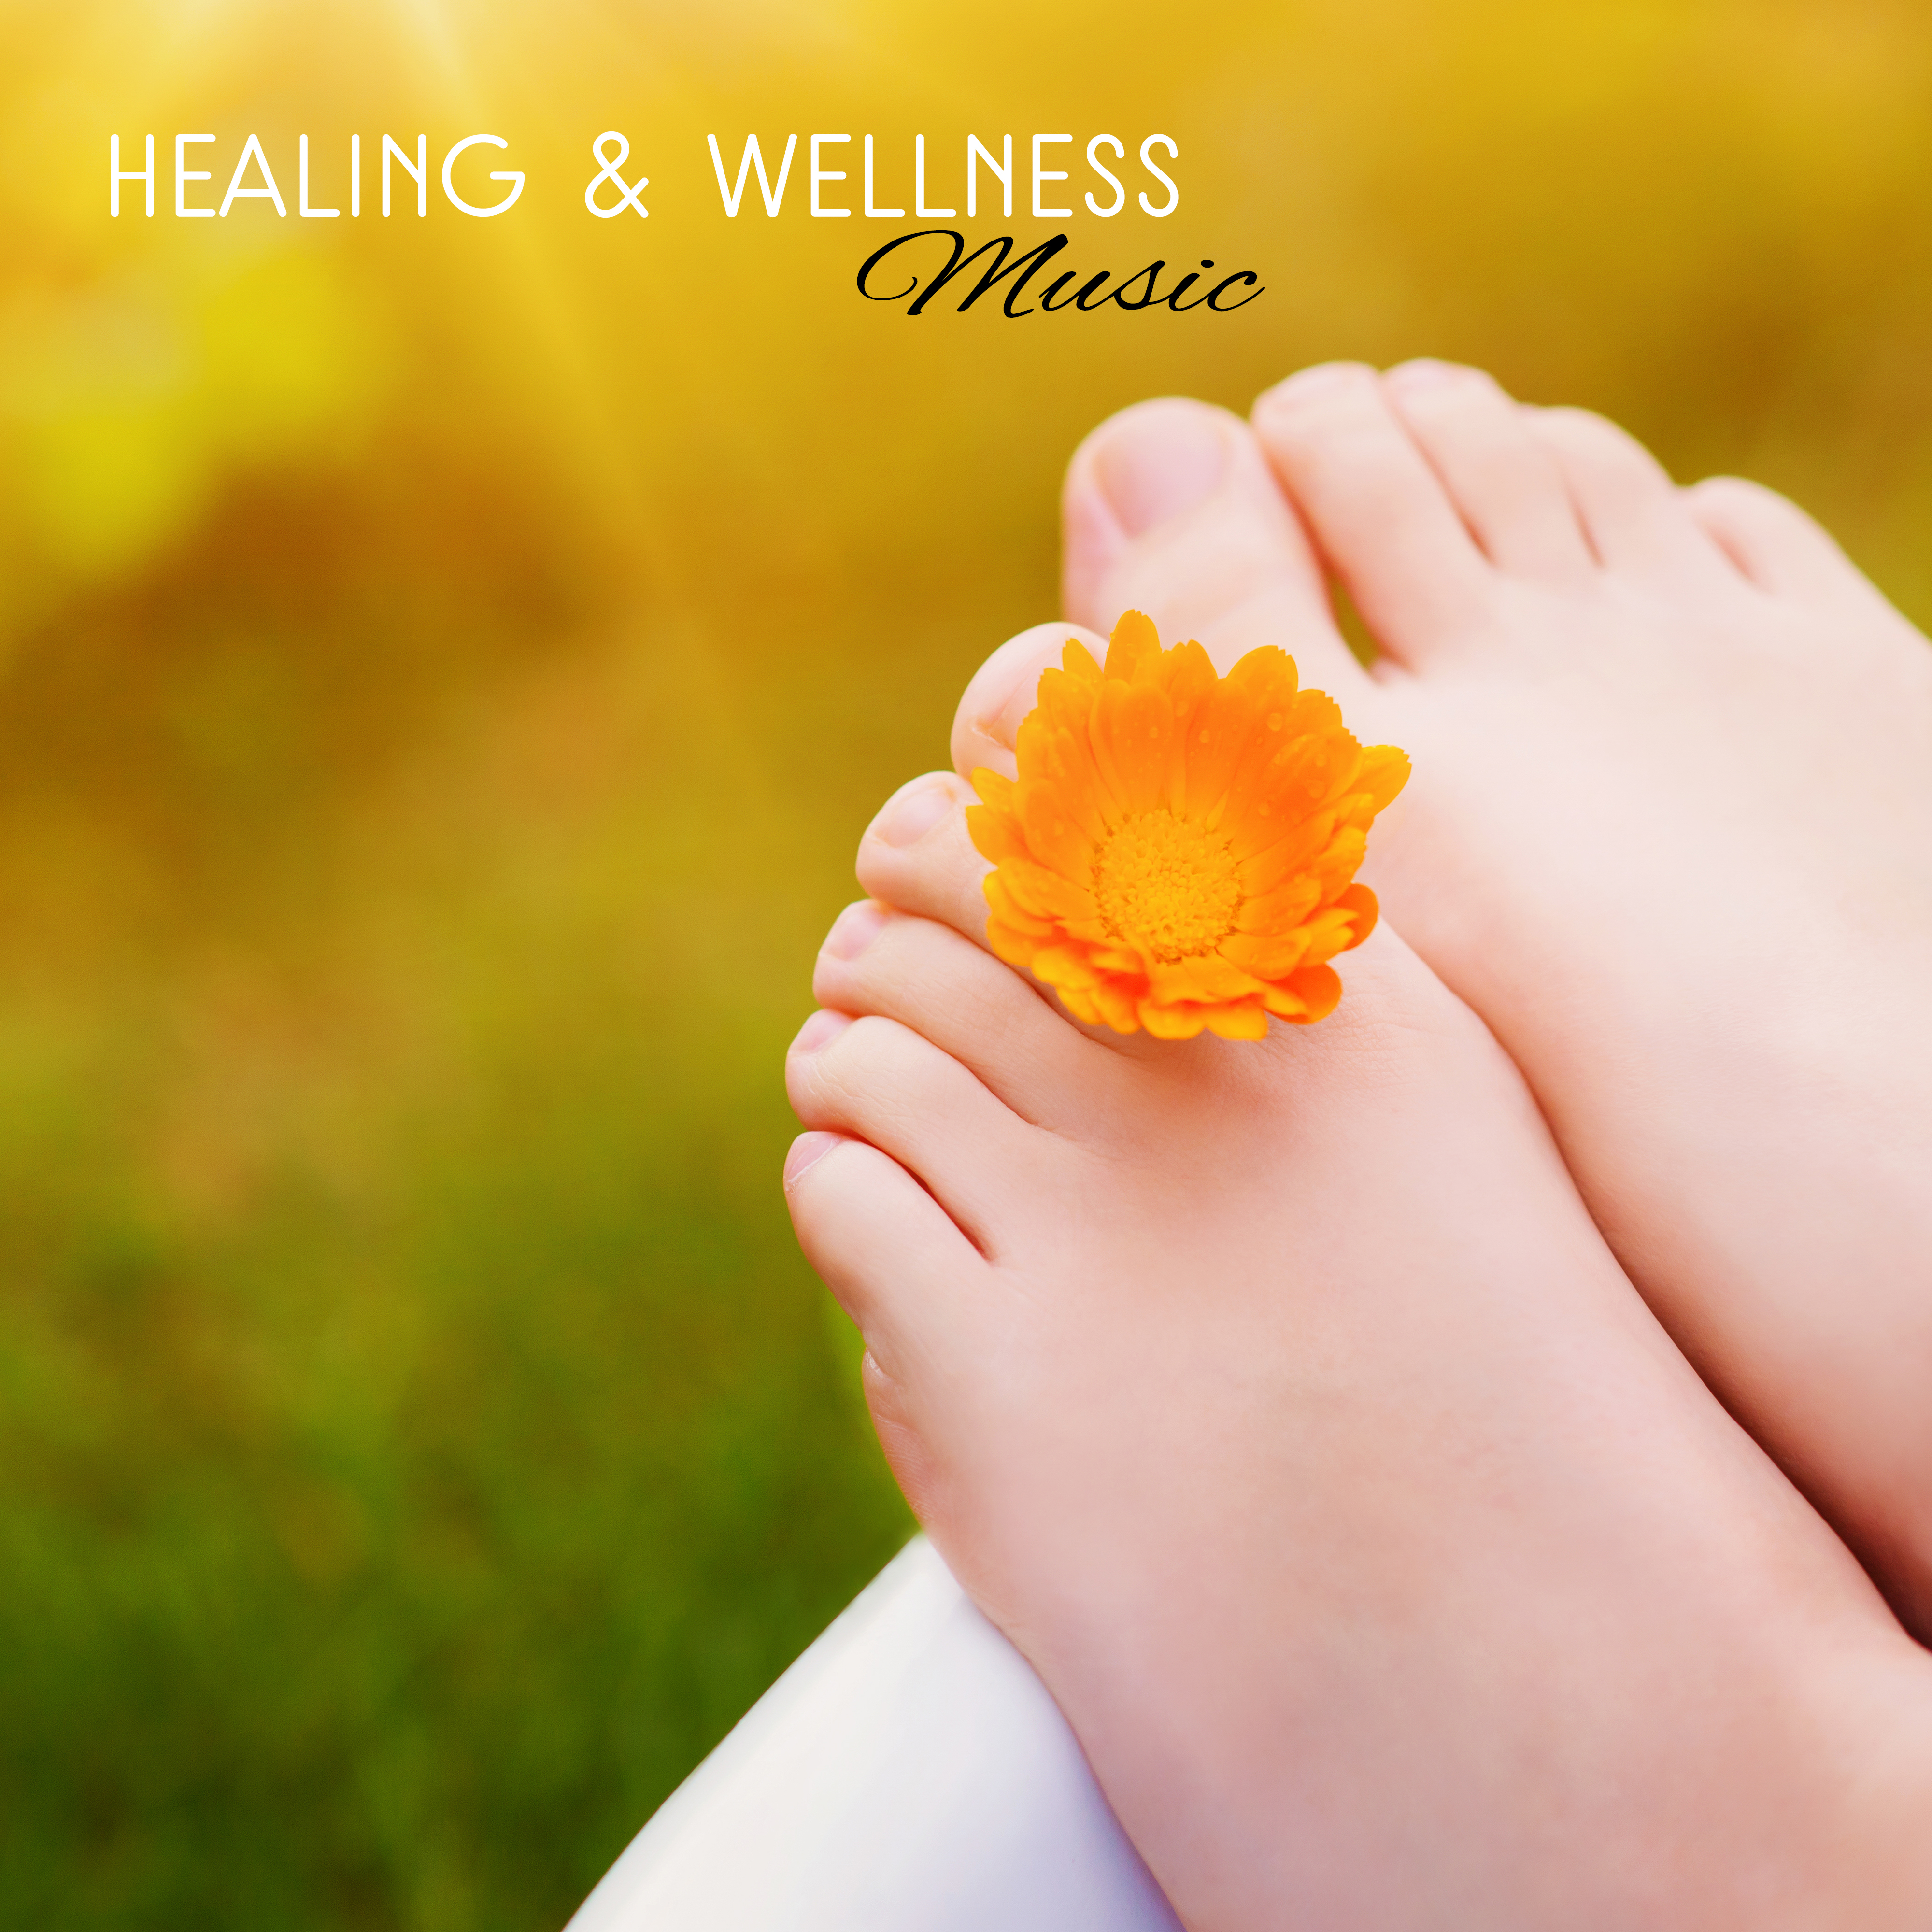 Healing & Wellness Music – Soft Songs to Relax, Massage Melodies, Chilled Sounds for Spa, New Age Music